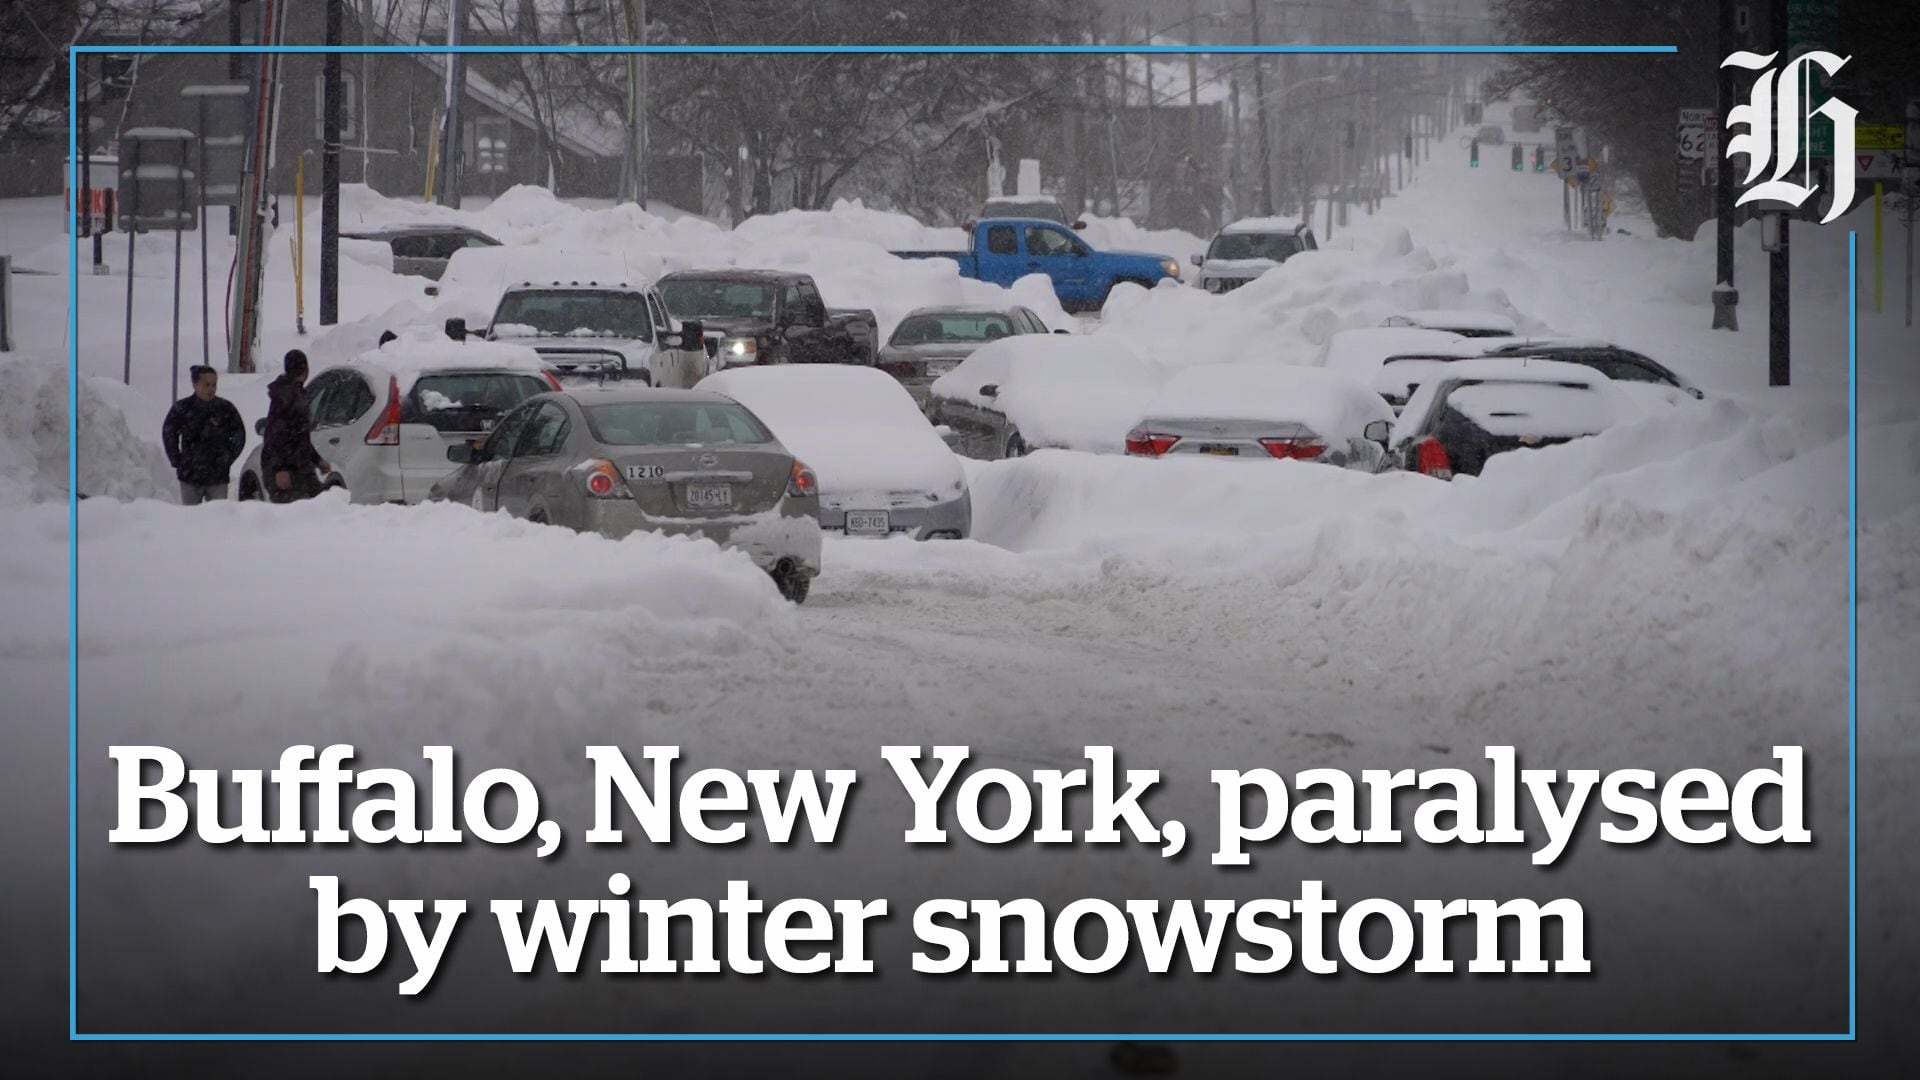 Buffalo faces more snow after deadliest storm in decades - POLITICO